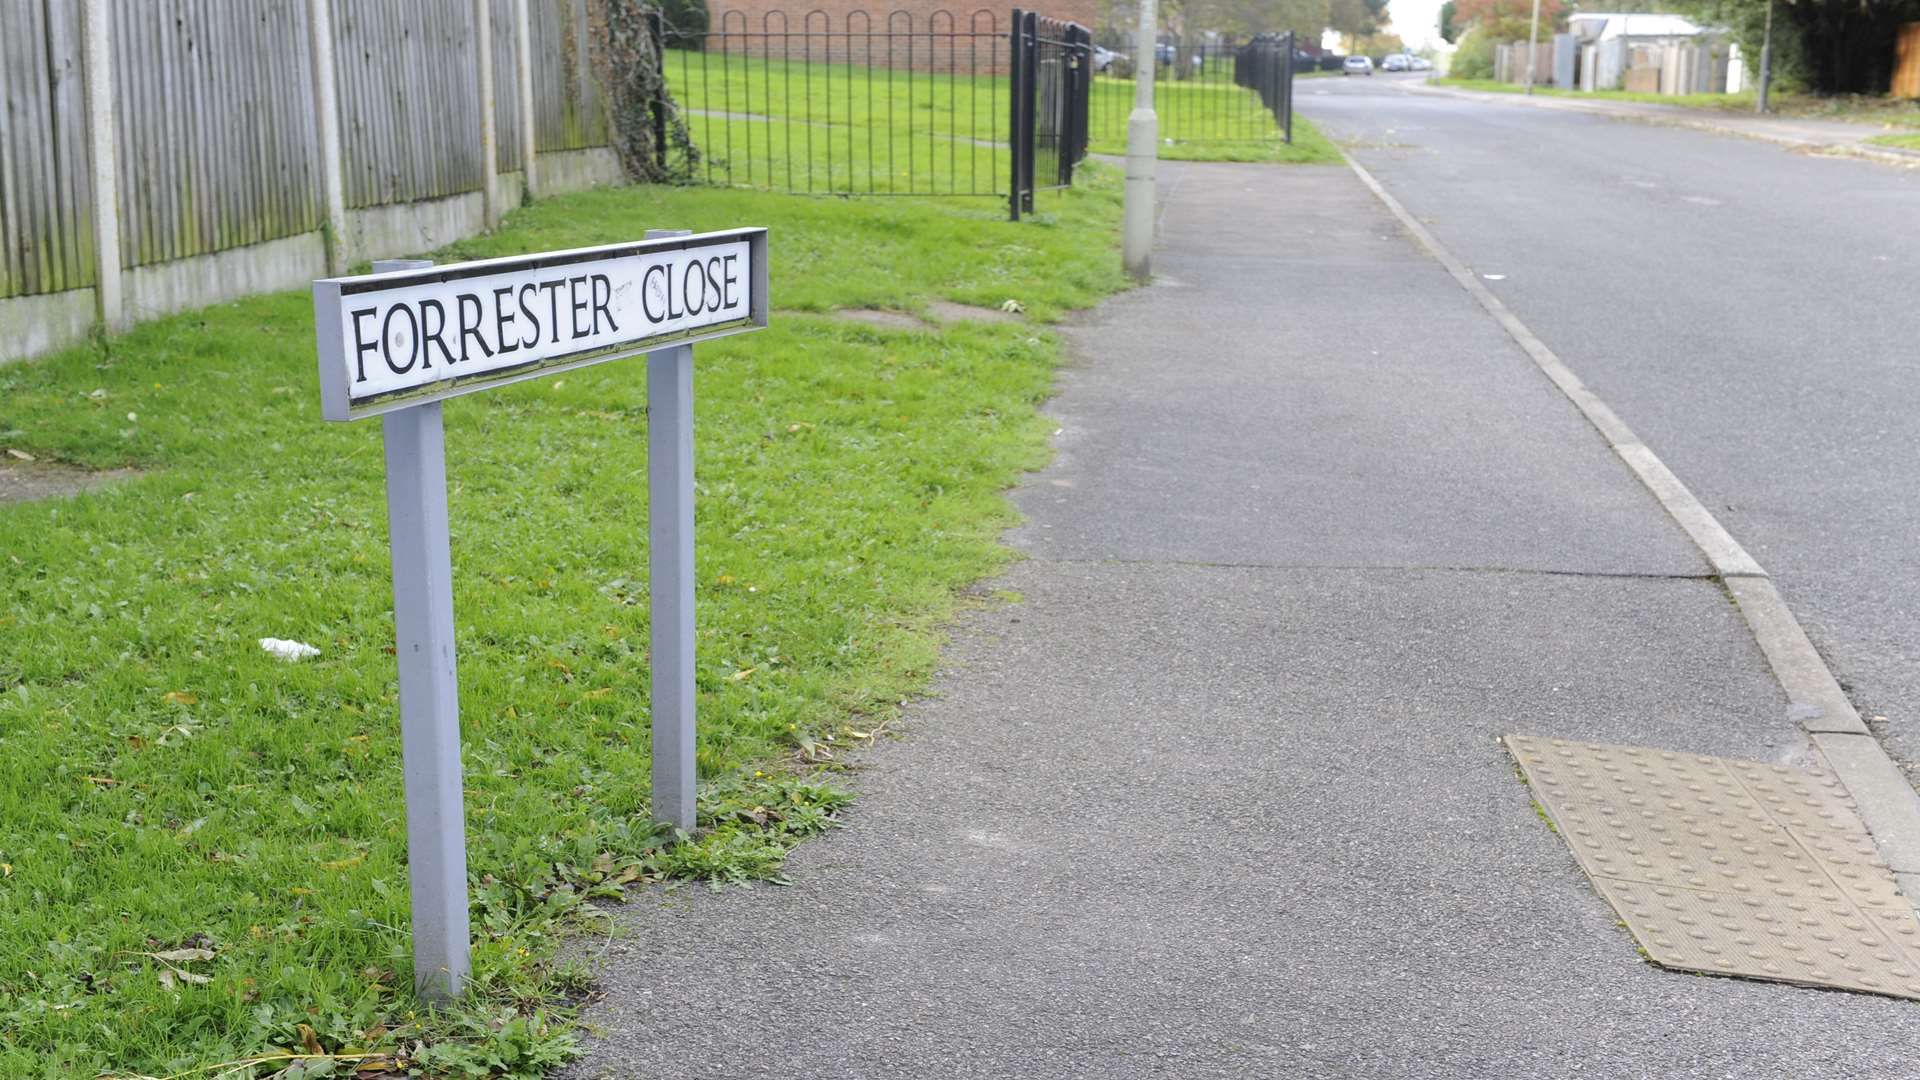 Forrester Close where the attack took place.